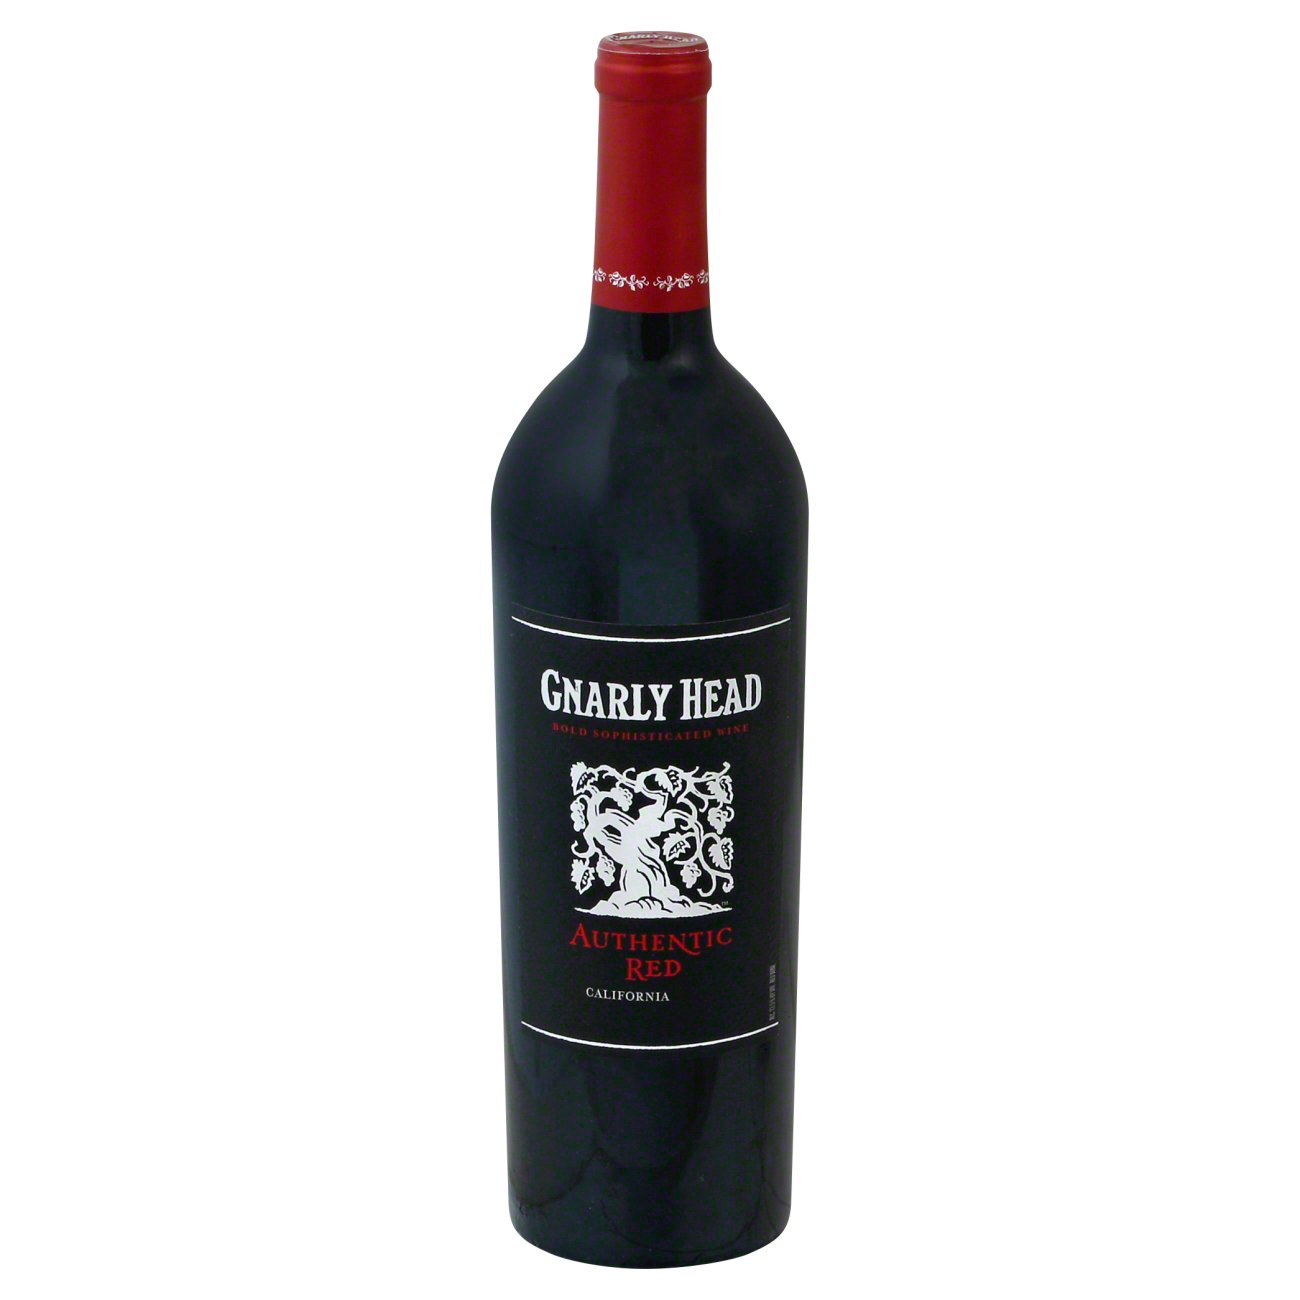 images/wine/Red Wine/Gnarly Head Authentic Red .jpg